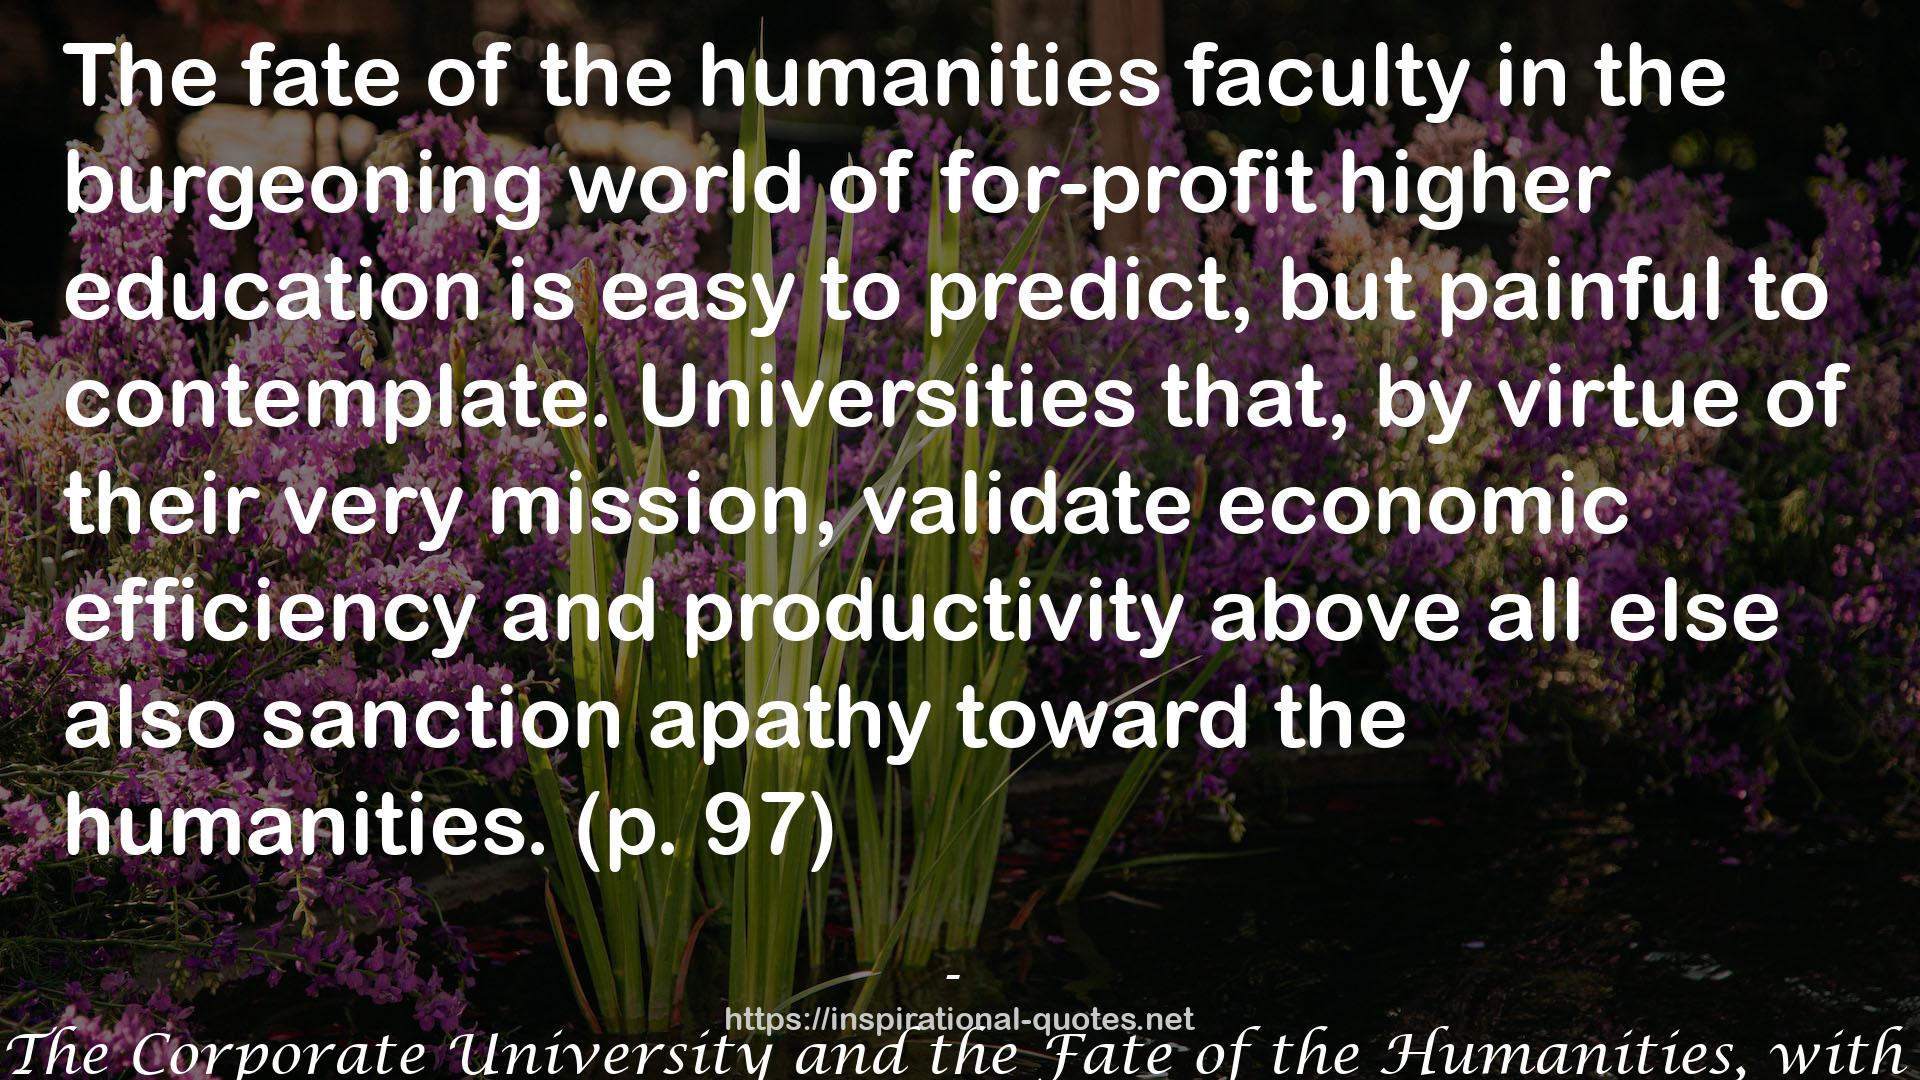 The Last Professors: The Corporate University and the Fate of the Humanities, with a New Introduction QUOTES